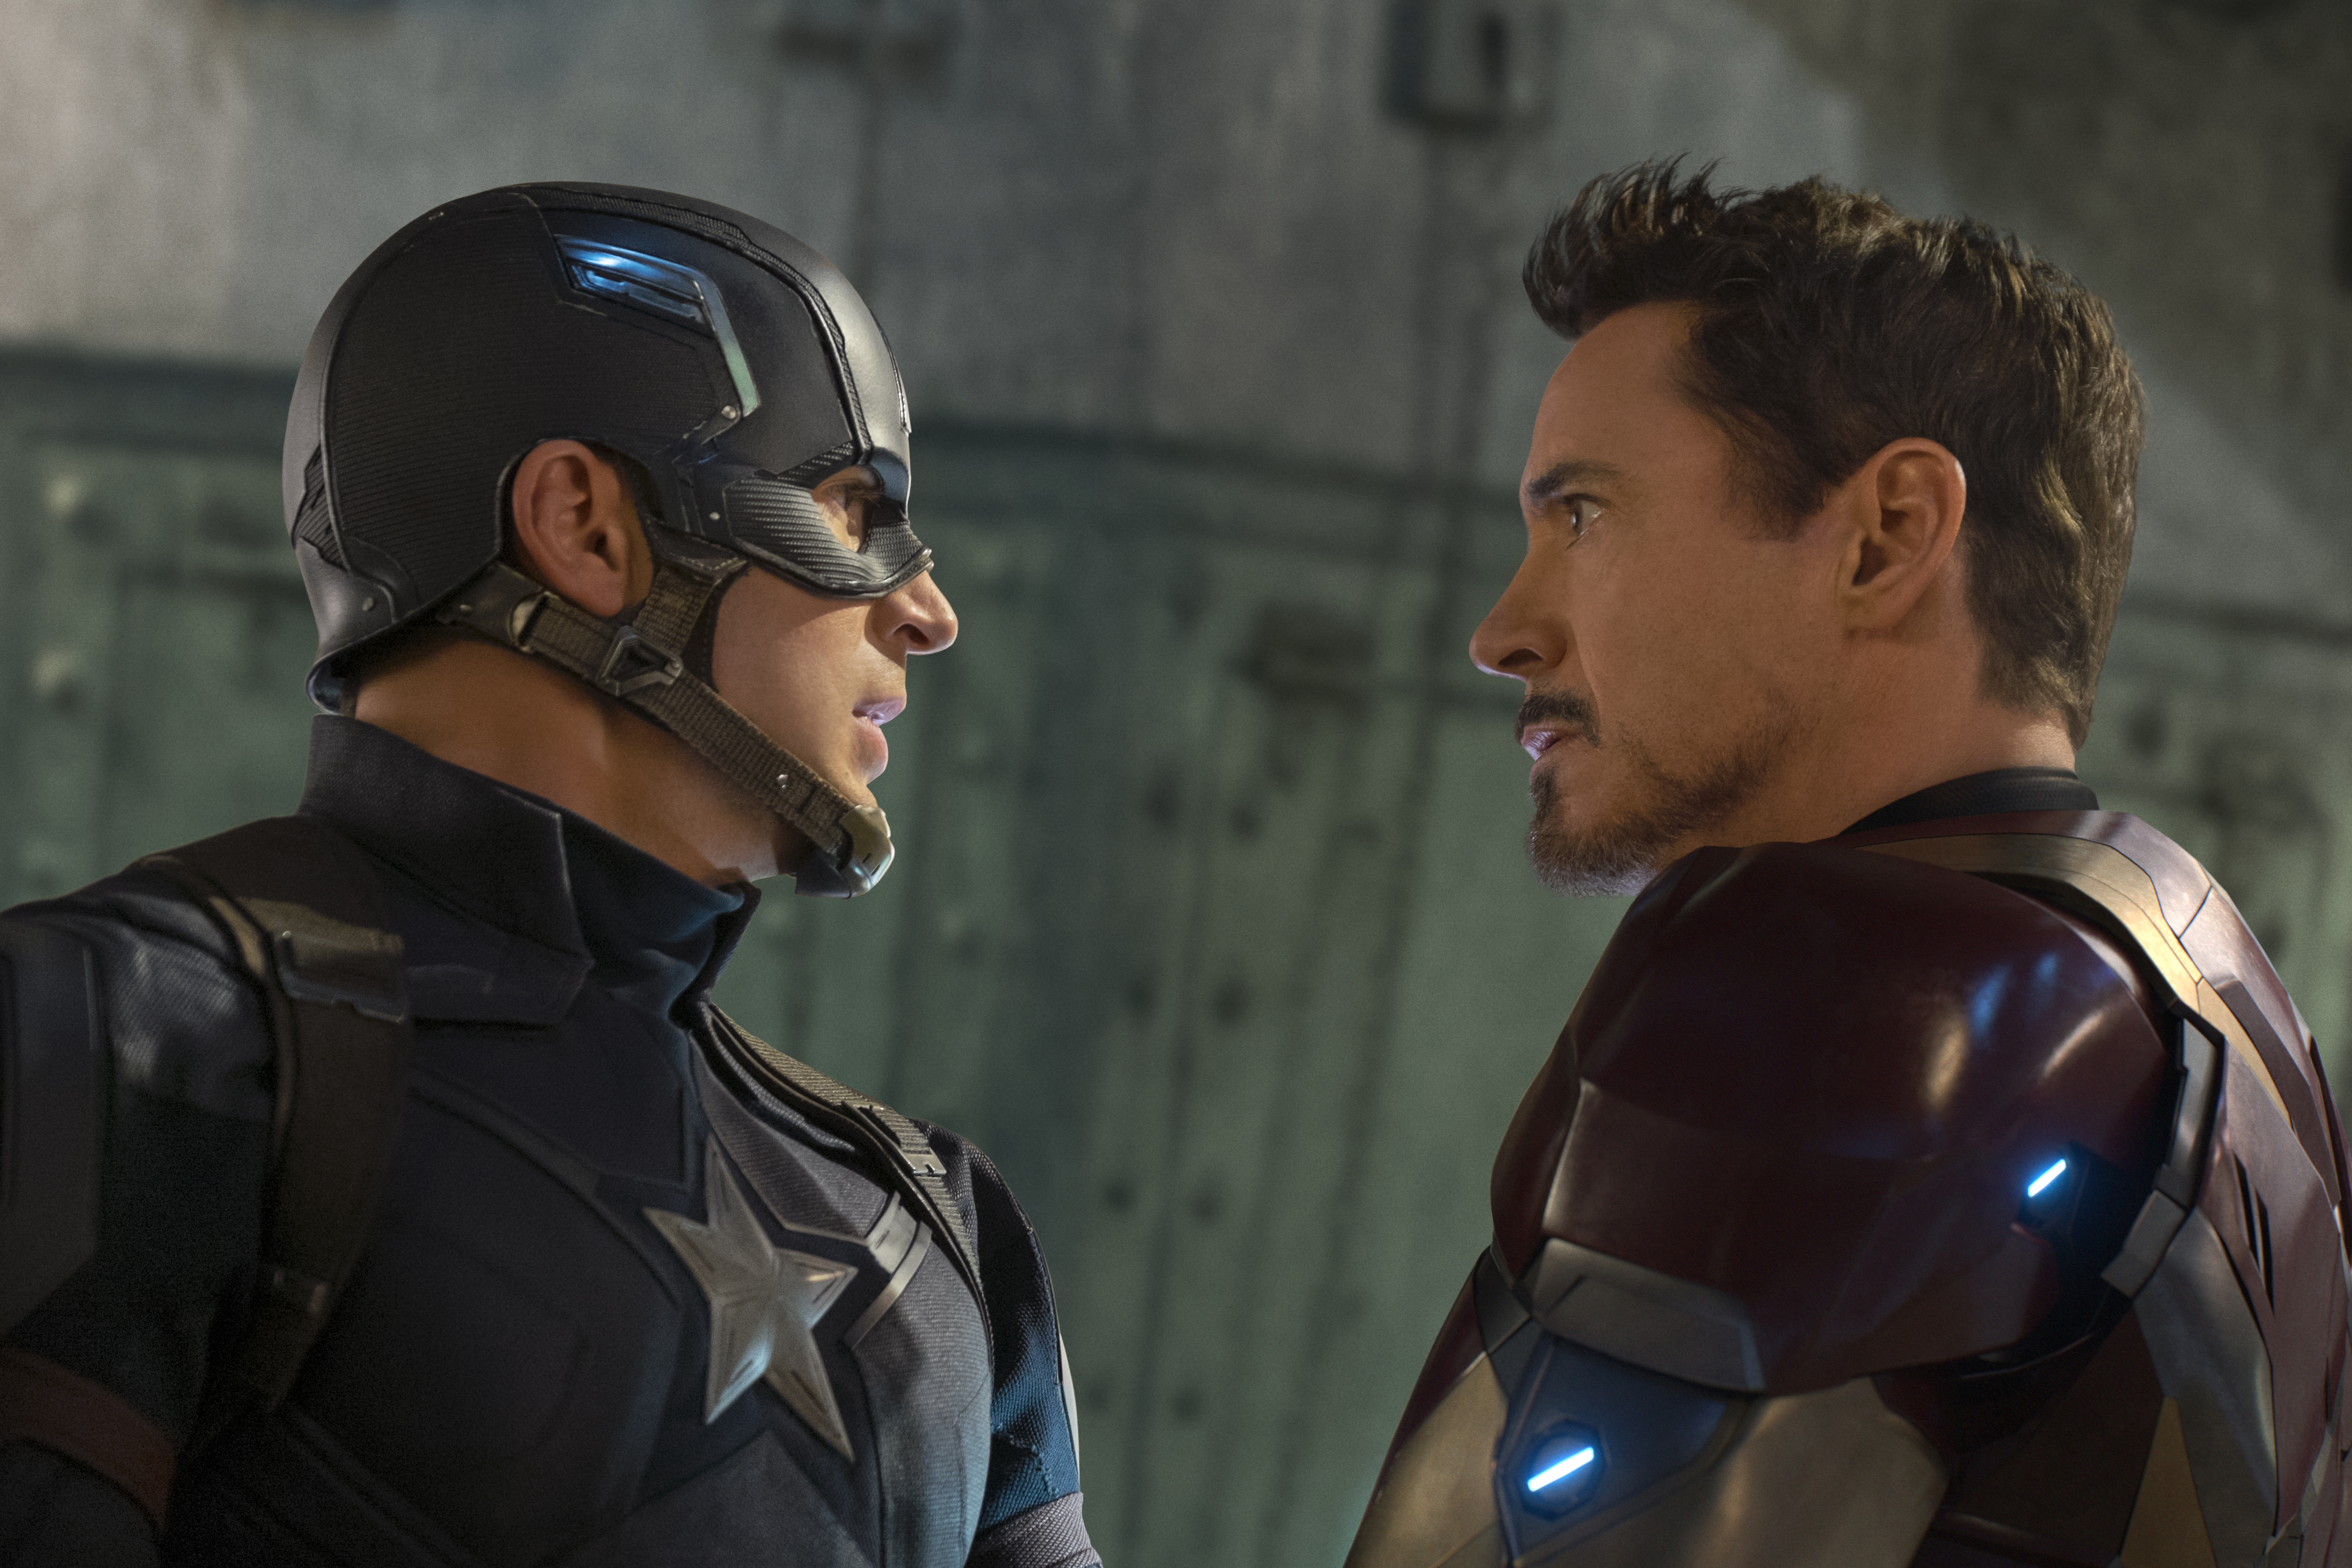 Disney Sets New Box Office Records With Debut of “Captain America: Civil War”